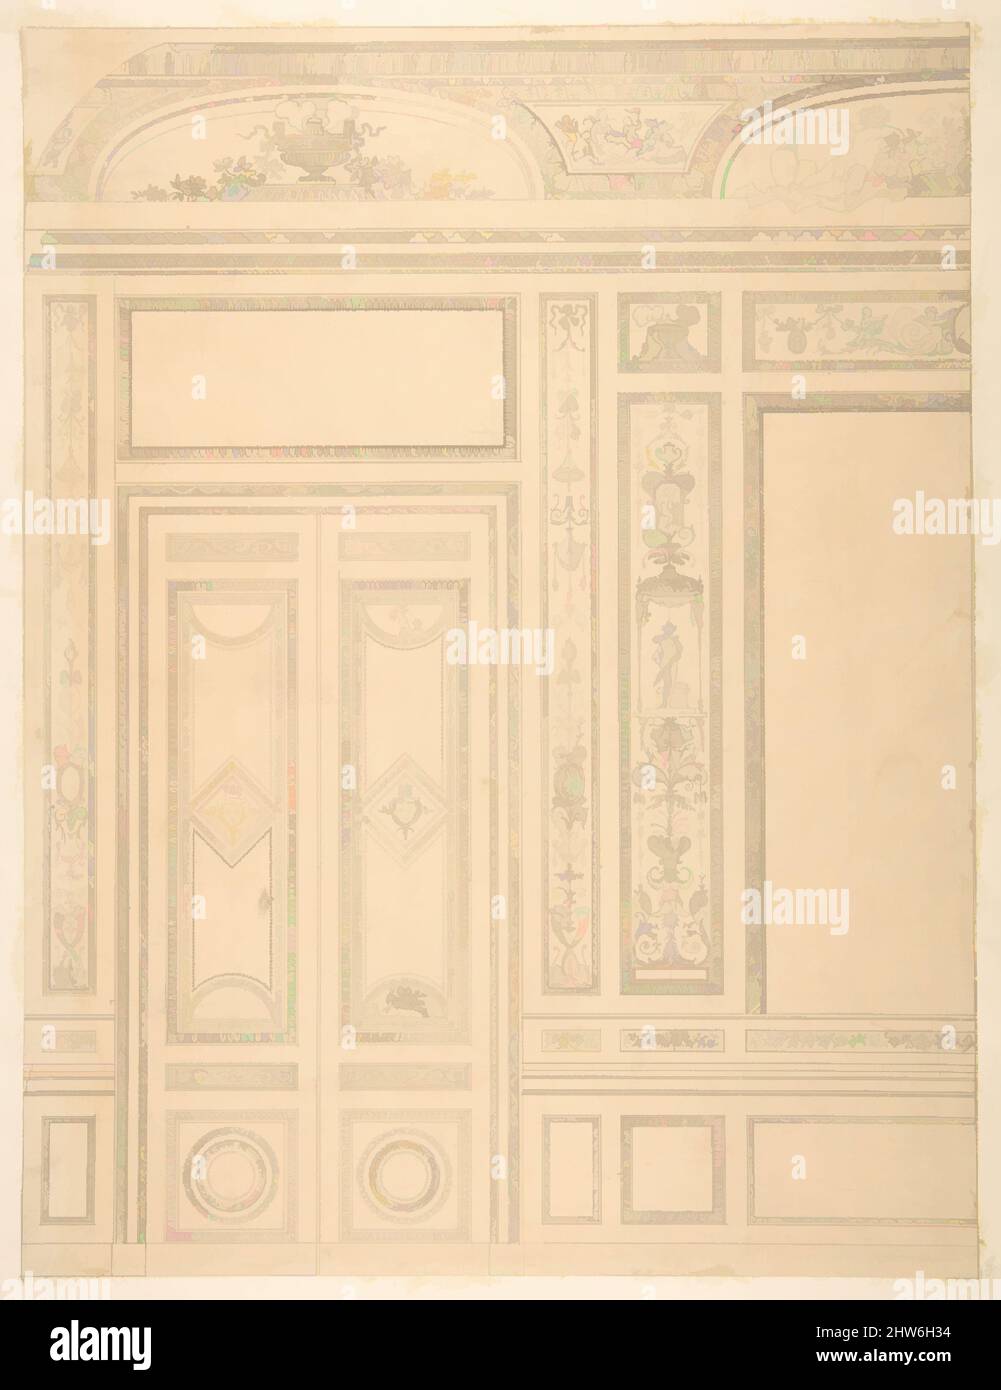 Art inspired by Elevation of an interior showing a paneled wall and double doors decorated in rococco sty.e, 1830–97, graphite on wove paper; inlaid in wove paper, Drawings, Jules-Edmond-Charles Lachaise (French, died 1897), Eugène-Pierre Gourdet (French, born Paris, 1820, Classic works modernized by Artotop with a splash of modernity. Shapes, color and value, eye-catching visual impact on art. Emotions through freedom of artworks in a contemporary way. A timeless message pursuing a wildly creative new direction. Artists turning to the digital medium and creating the Artotop NFT Stock Photo